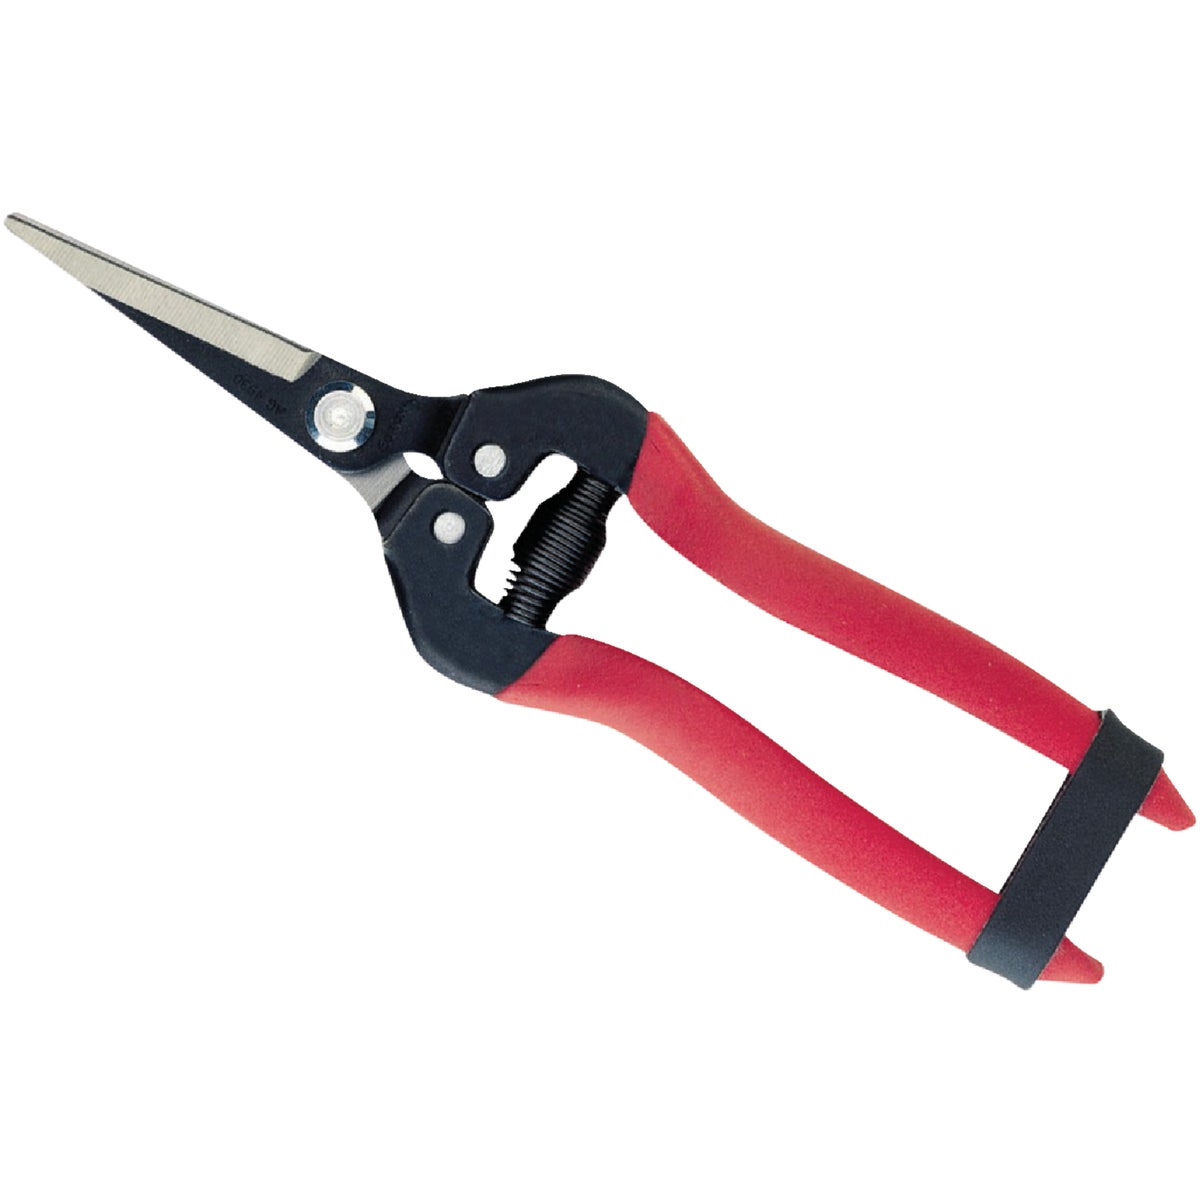 Item 730518, Professional quality agricultural snips feature 2-3/4" straight, pointed 